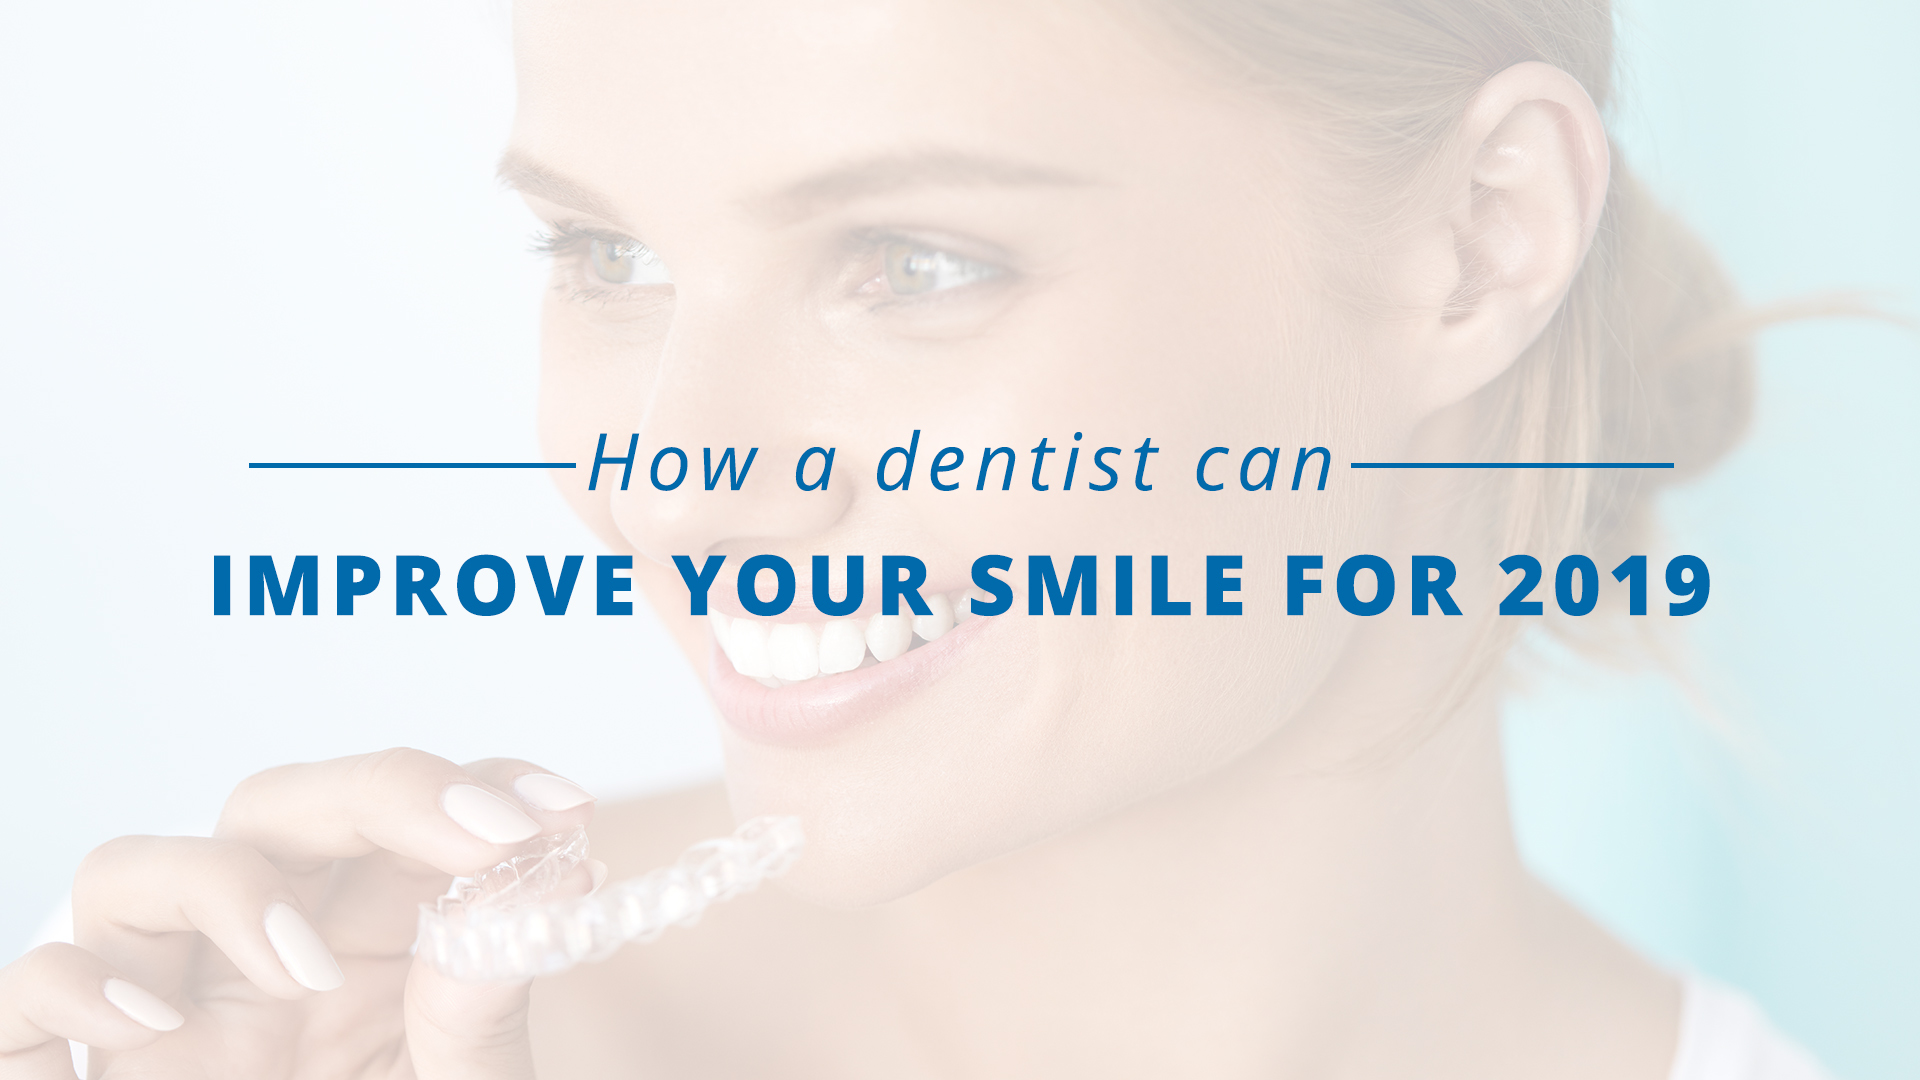 How a Dentist can Improve your Smile for 2019